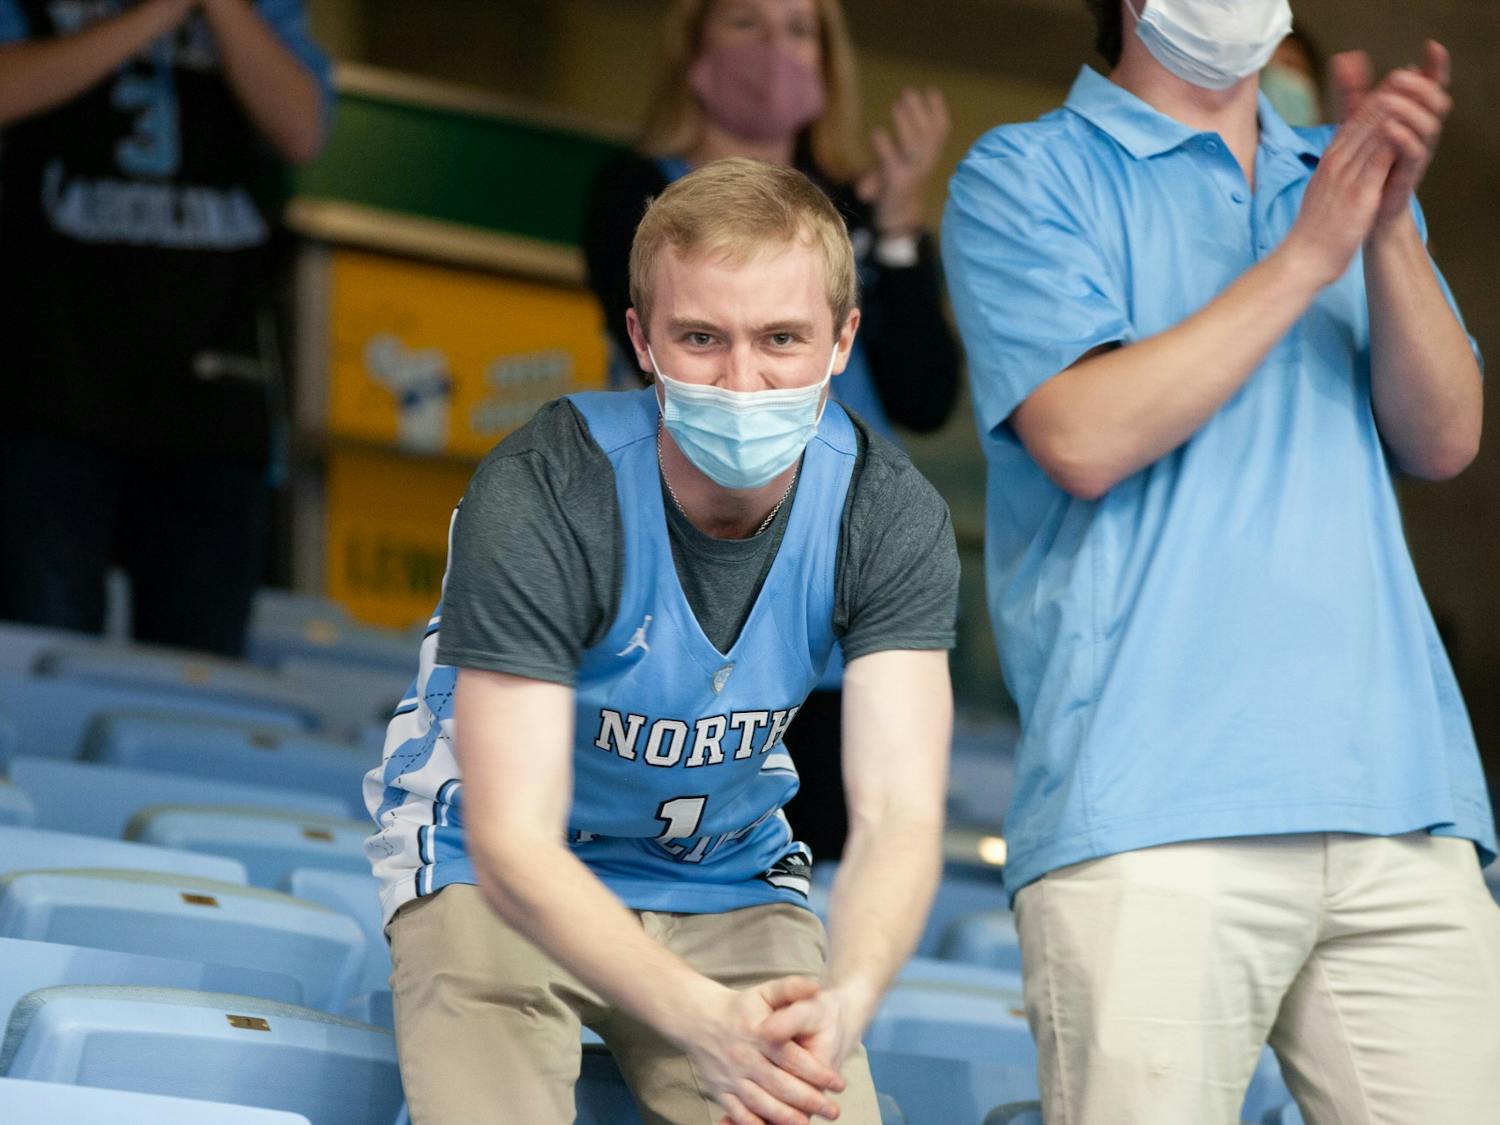 A fan celebrates a basket during UNC's 78-70 victory over Florida State in the Smith Center, Feb. 27, 2021. This was the first game this season for which fans were in attendance.